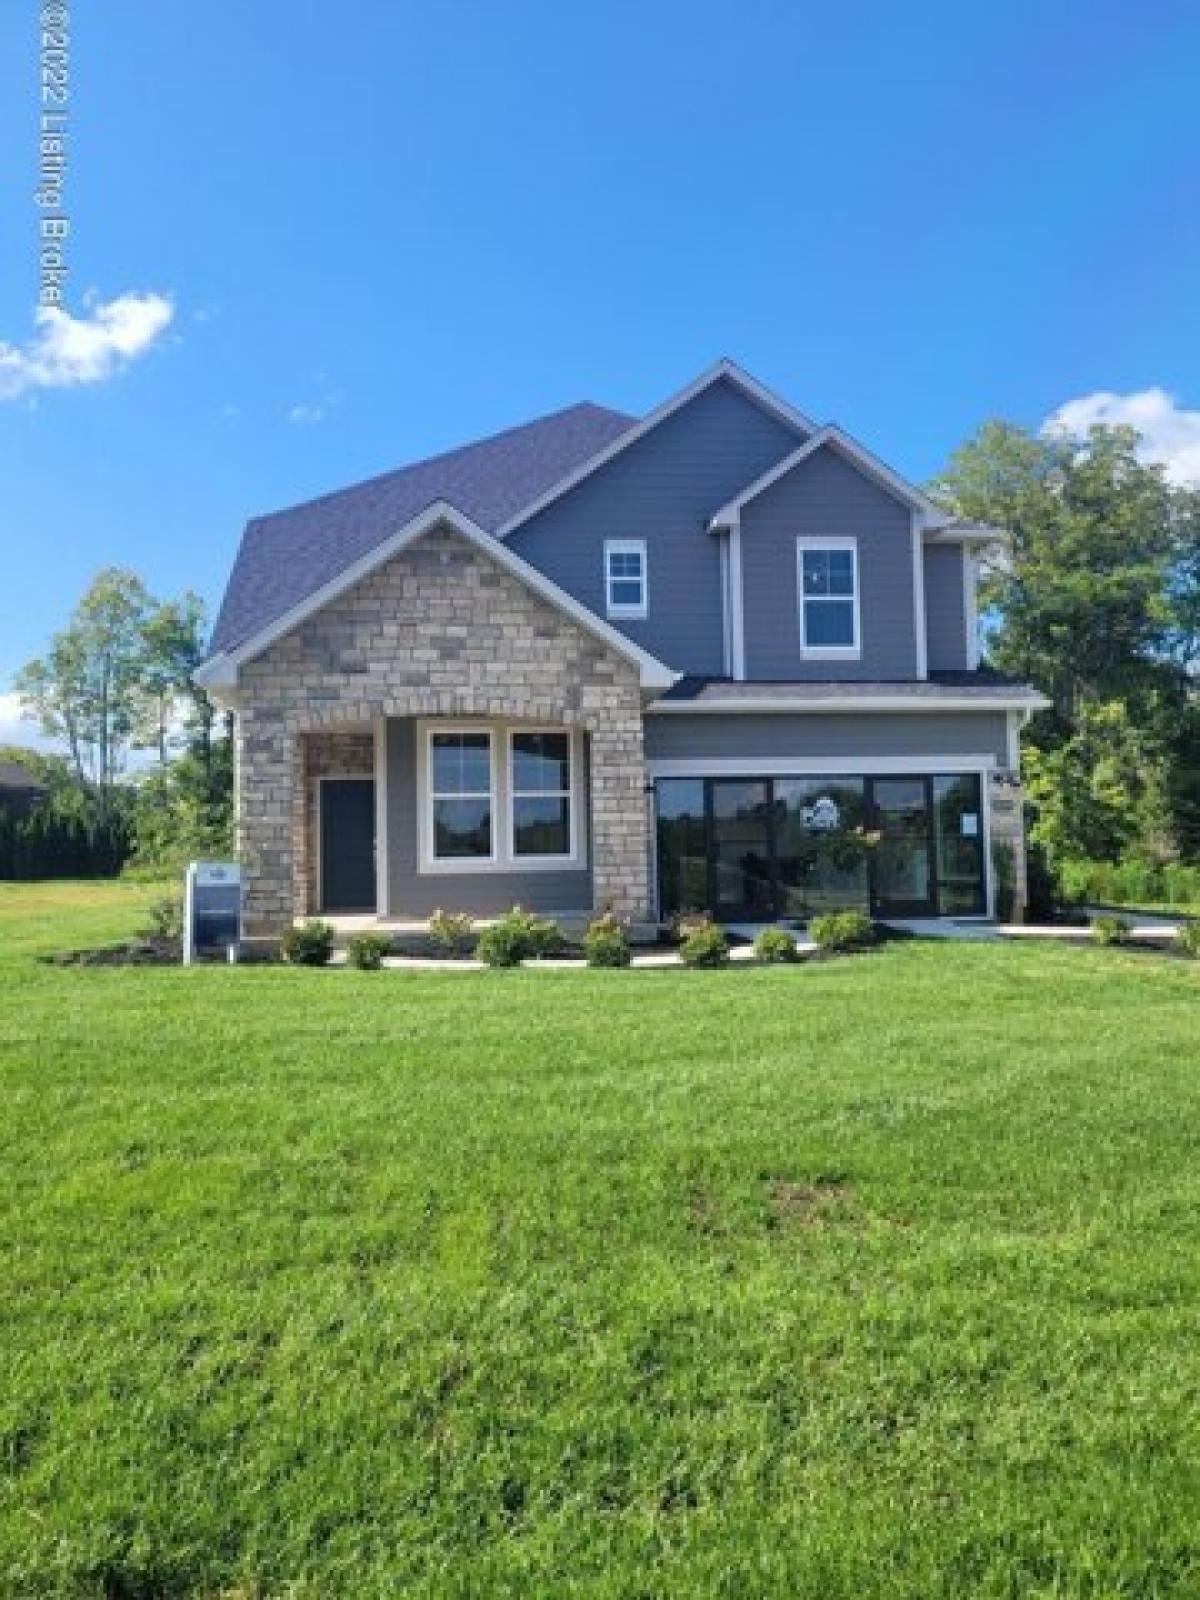 Picture of Home For Sale in Fisherville, Kentucky, United States